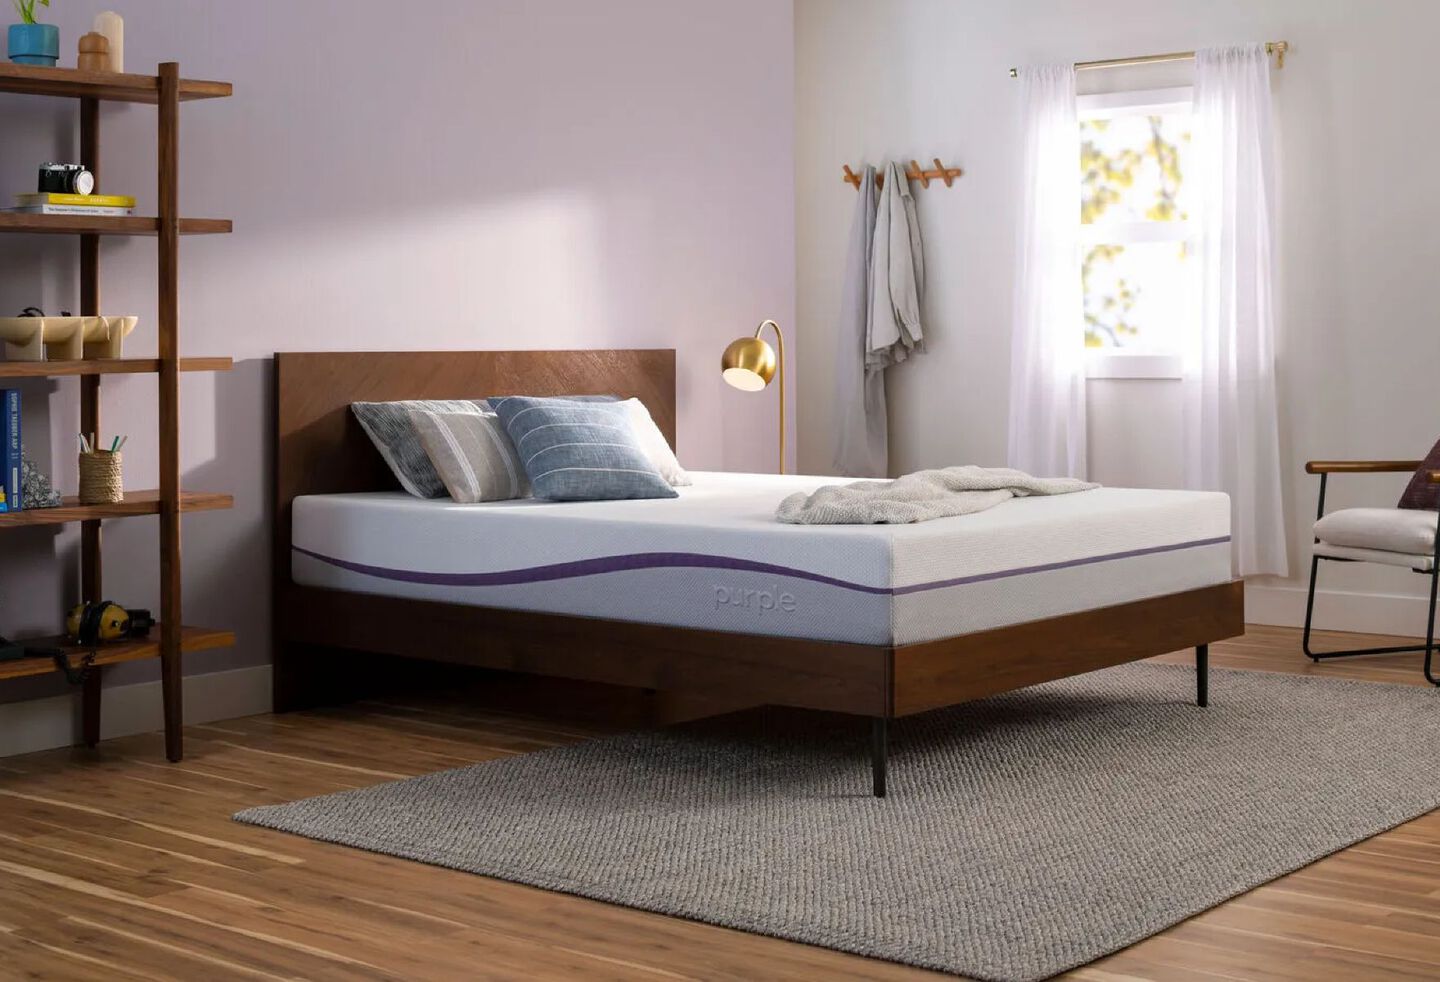 Purple mattress sitting atop a wooden bedframe in a bedroom